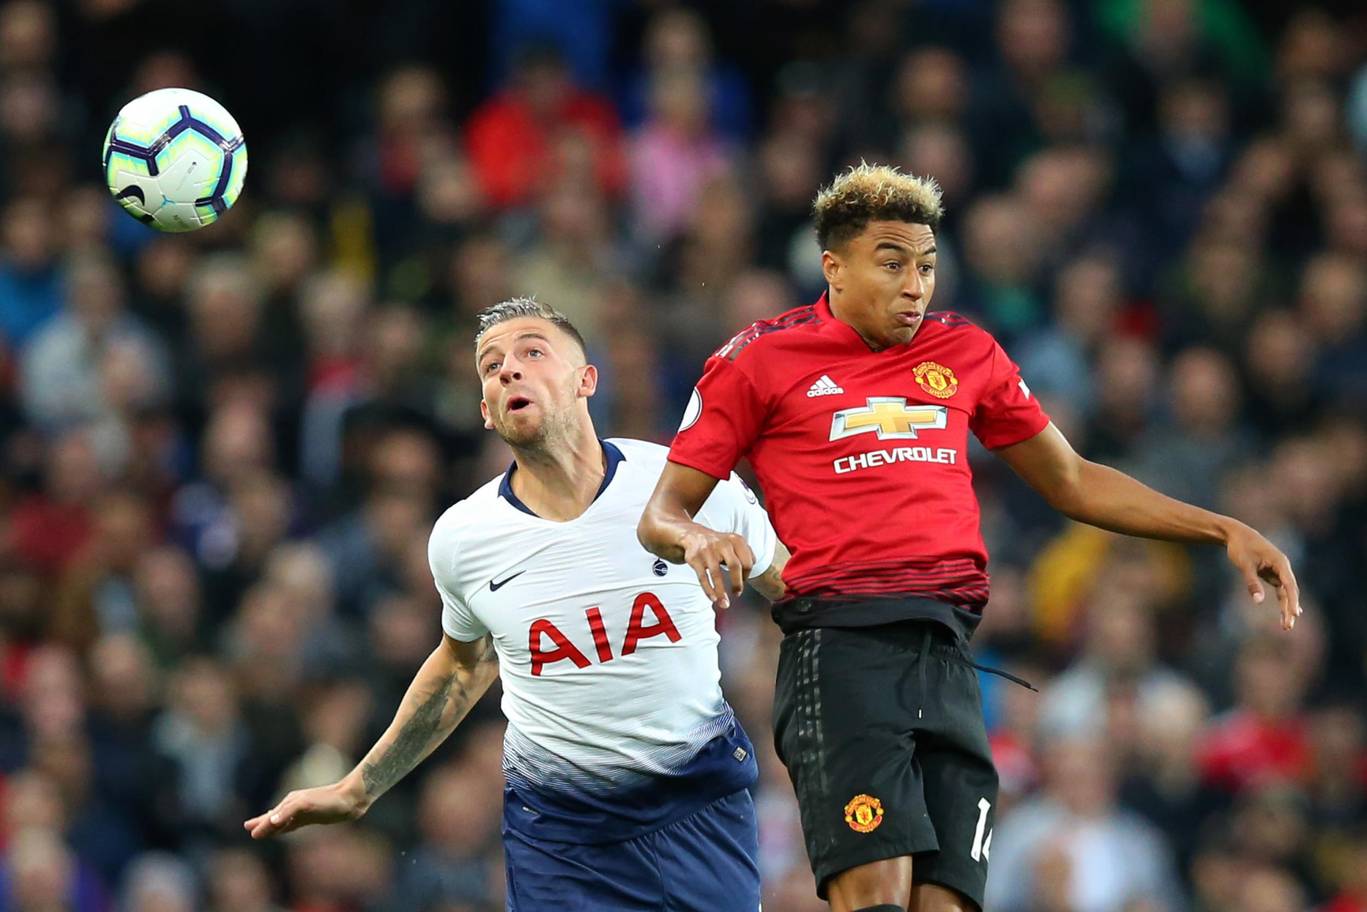 Tottenham's Toby Alderweireld challenges for the ball in the air with Manchester United's Jesse Lingard. (Getty Images)